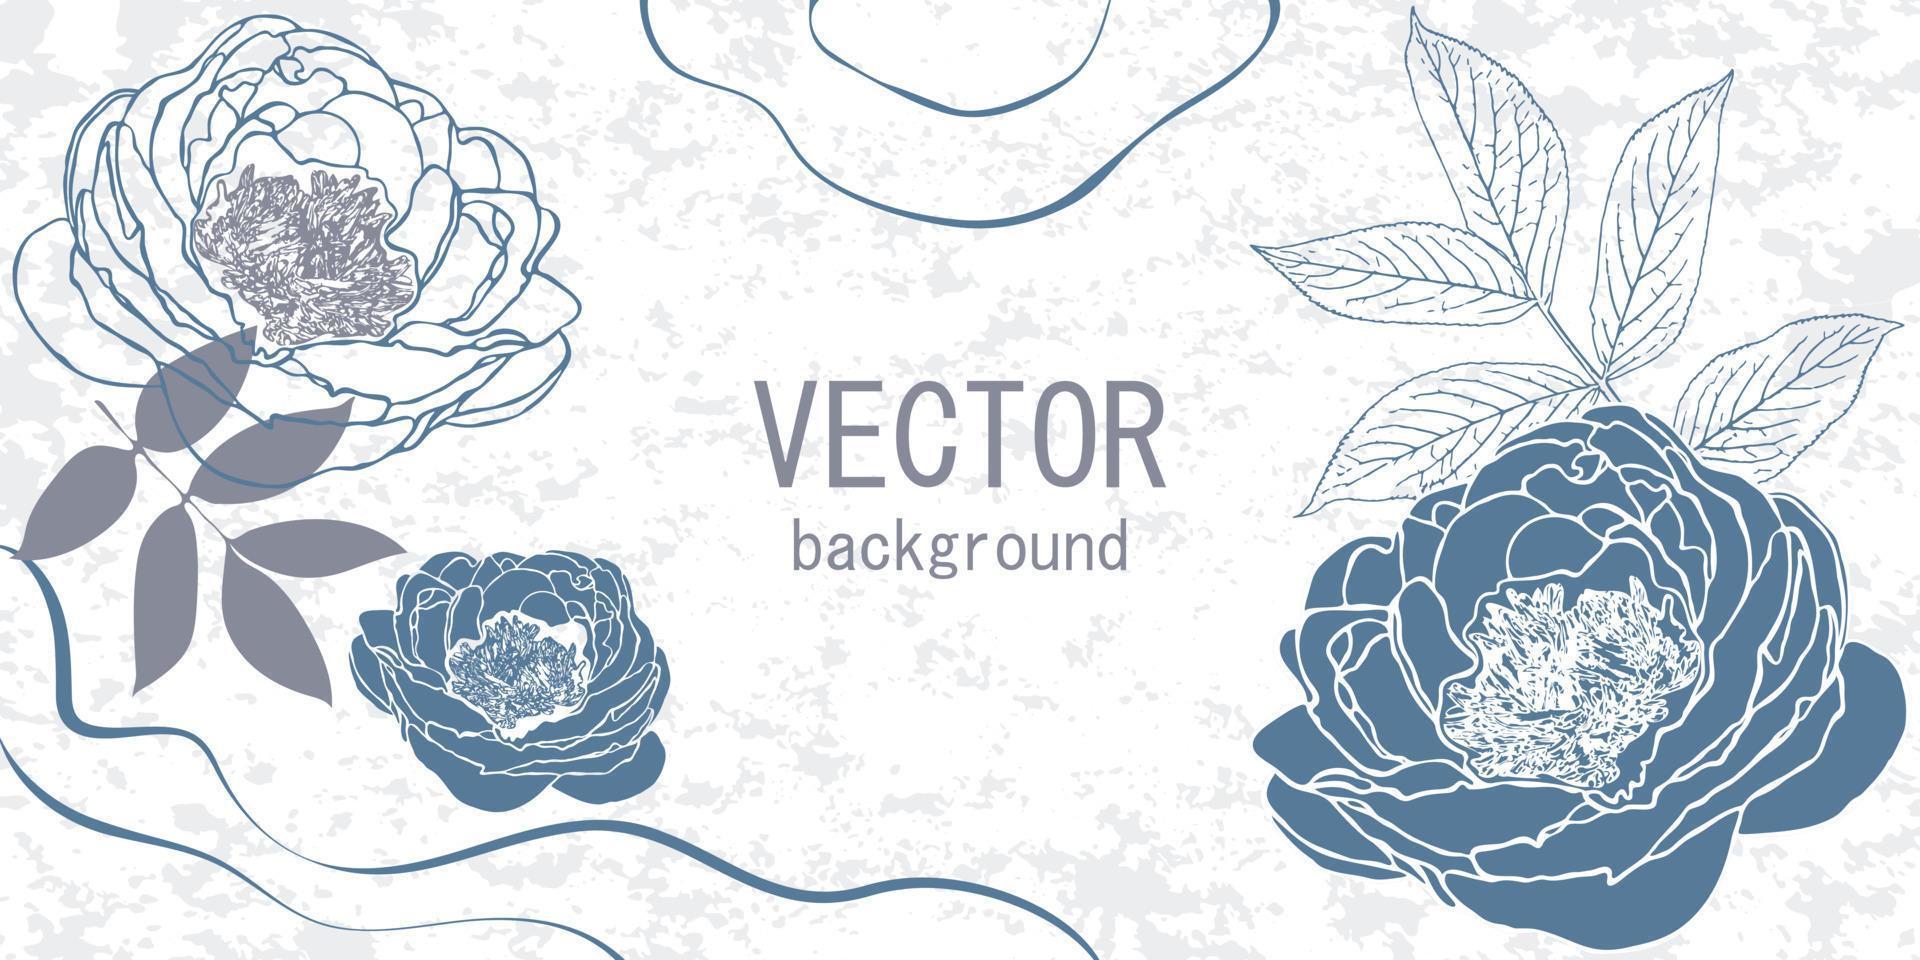 Minimal floral background with peonies and leaves. Vector summer blue background. Abstract art for banner, packaging or wedding invitation.